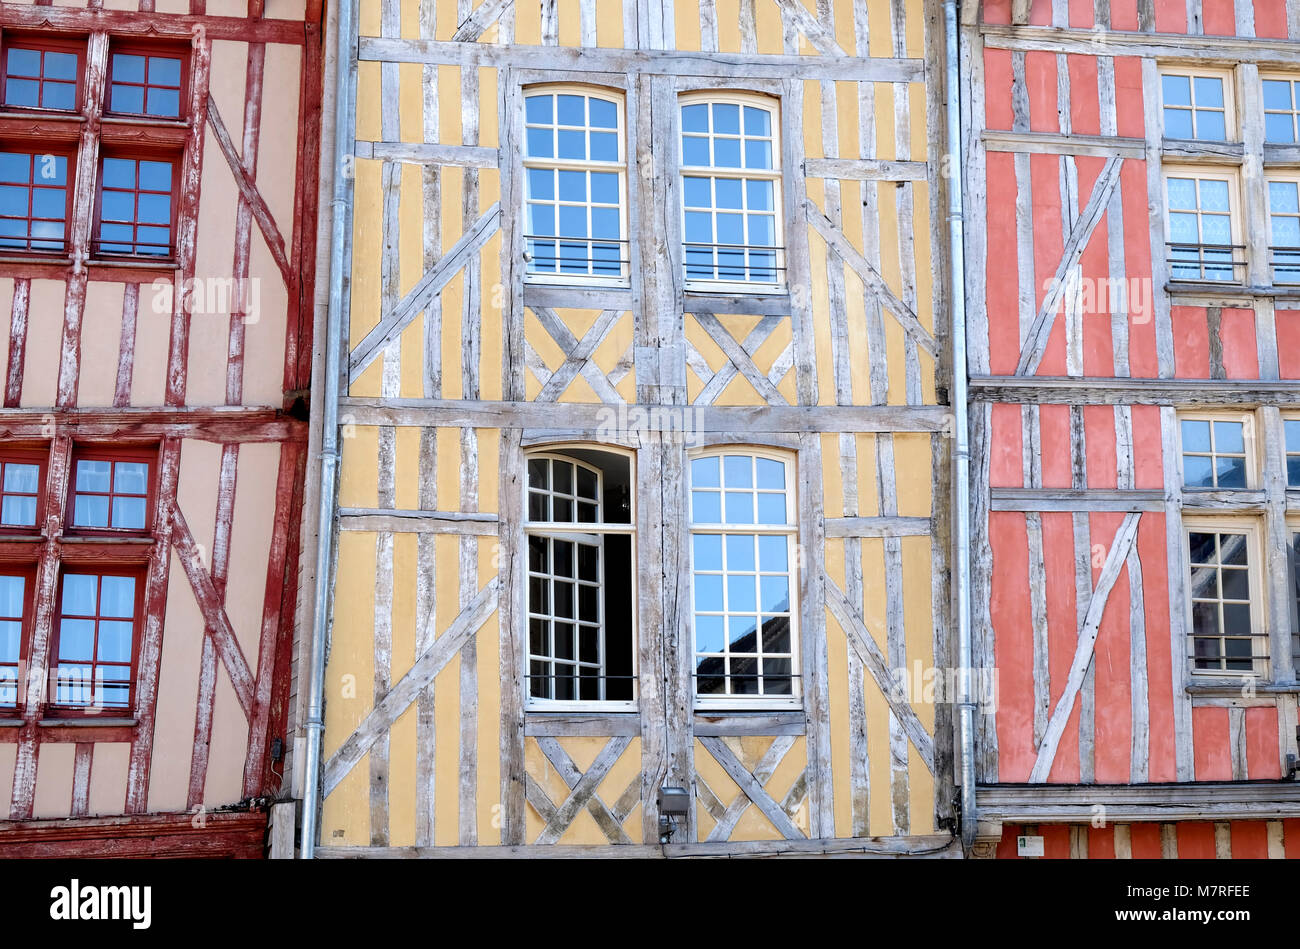 Colourful buildings in Troyes, France Stock Photo